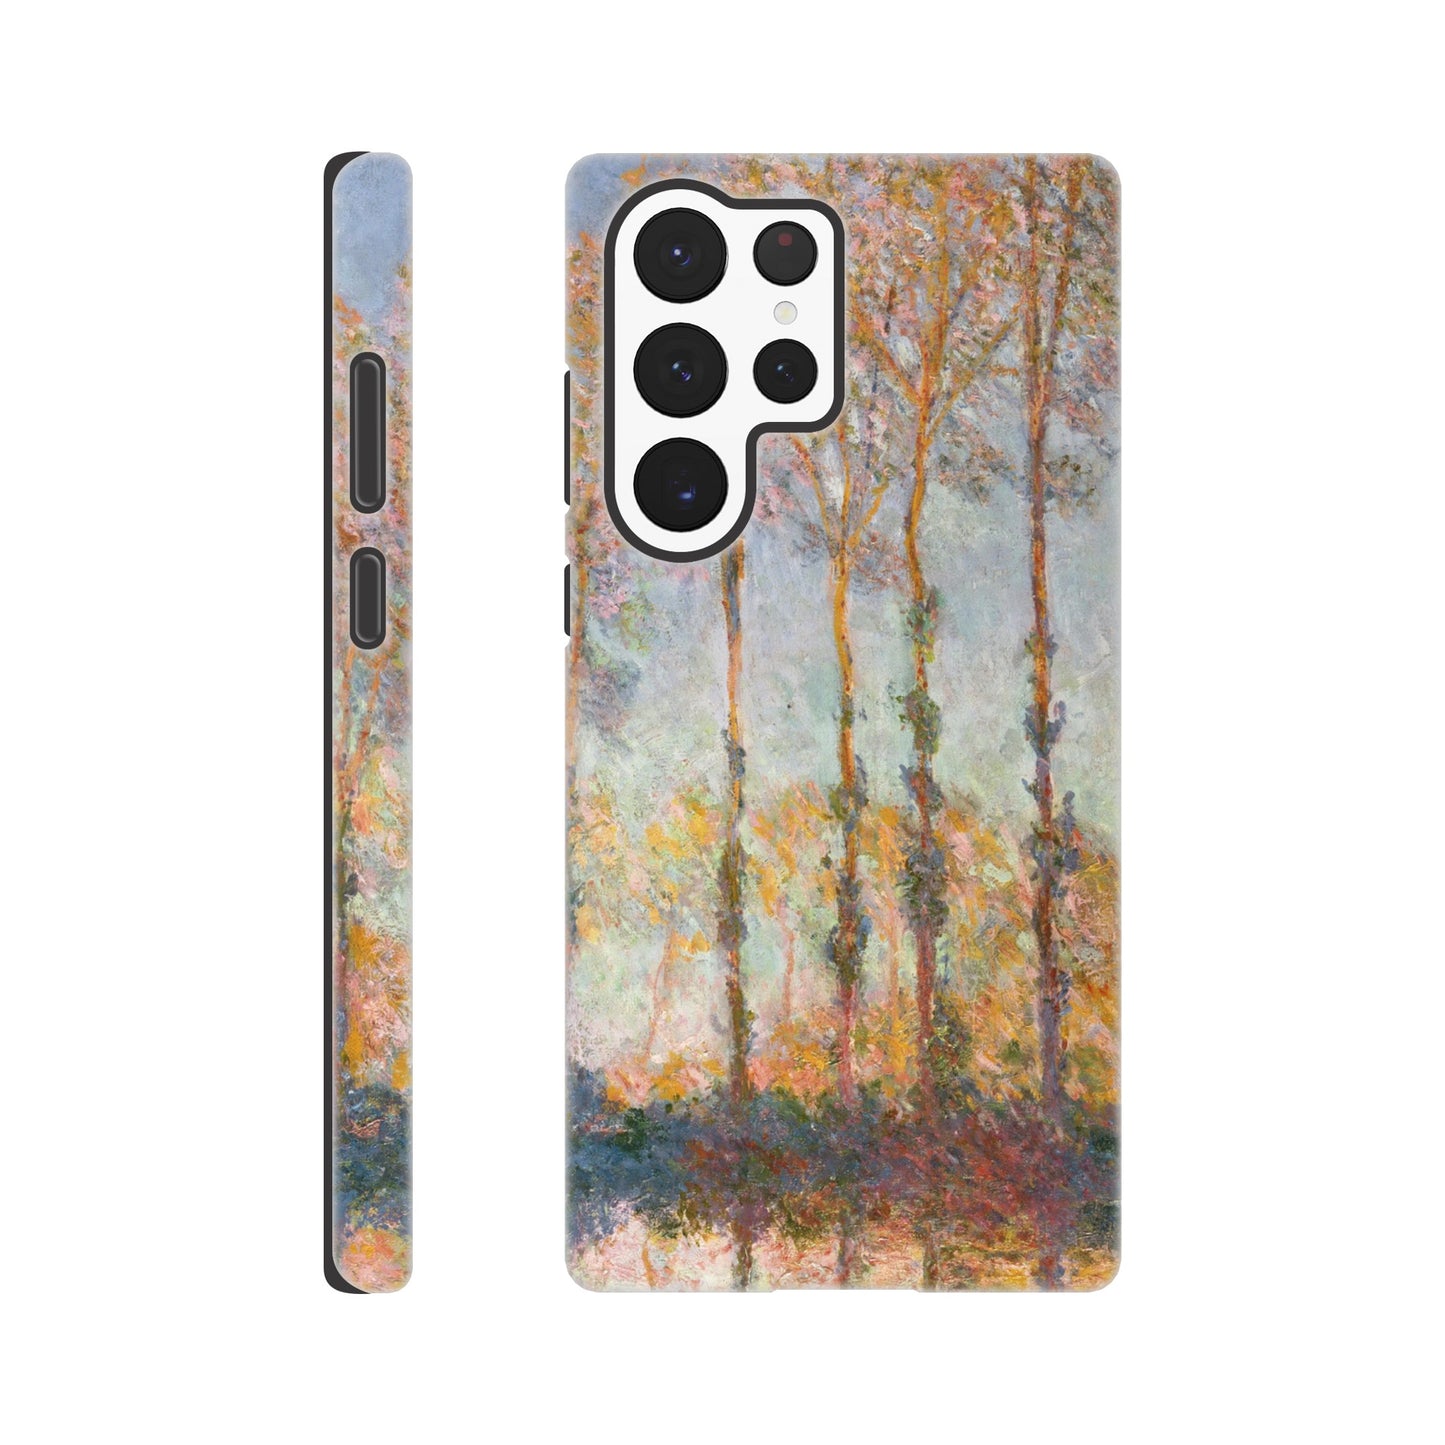 CLAUD MONET - POPLARS AT THE BANK OF EPTE RIVER - TOUGH PHONE CASE